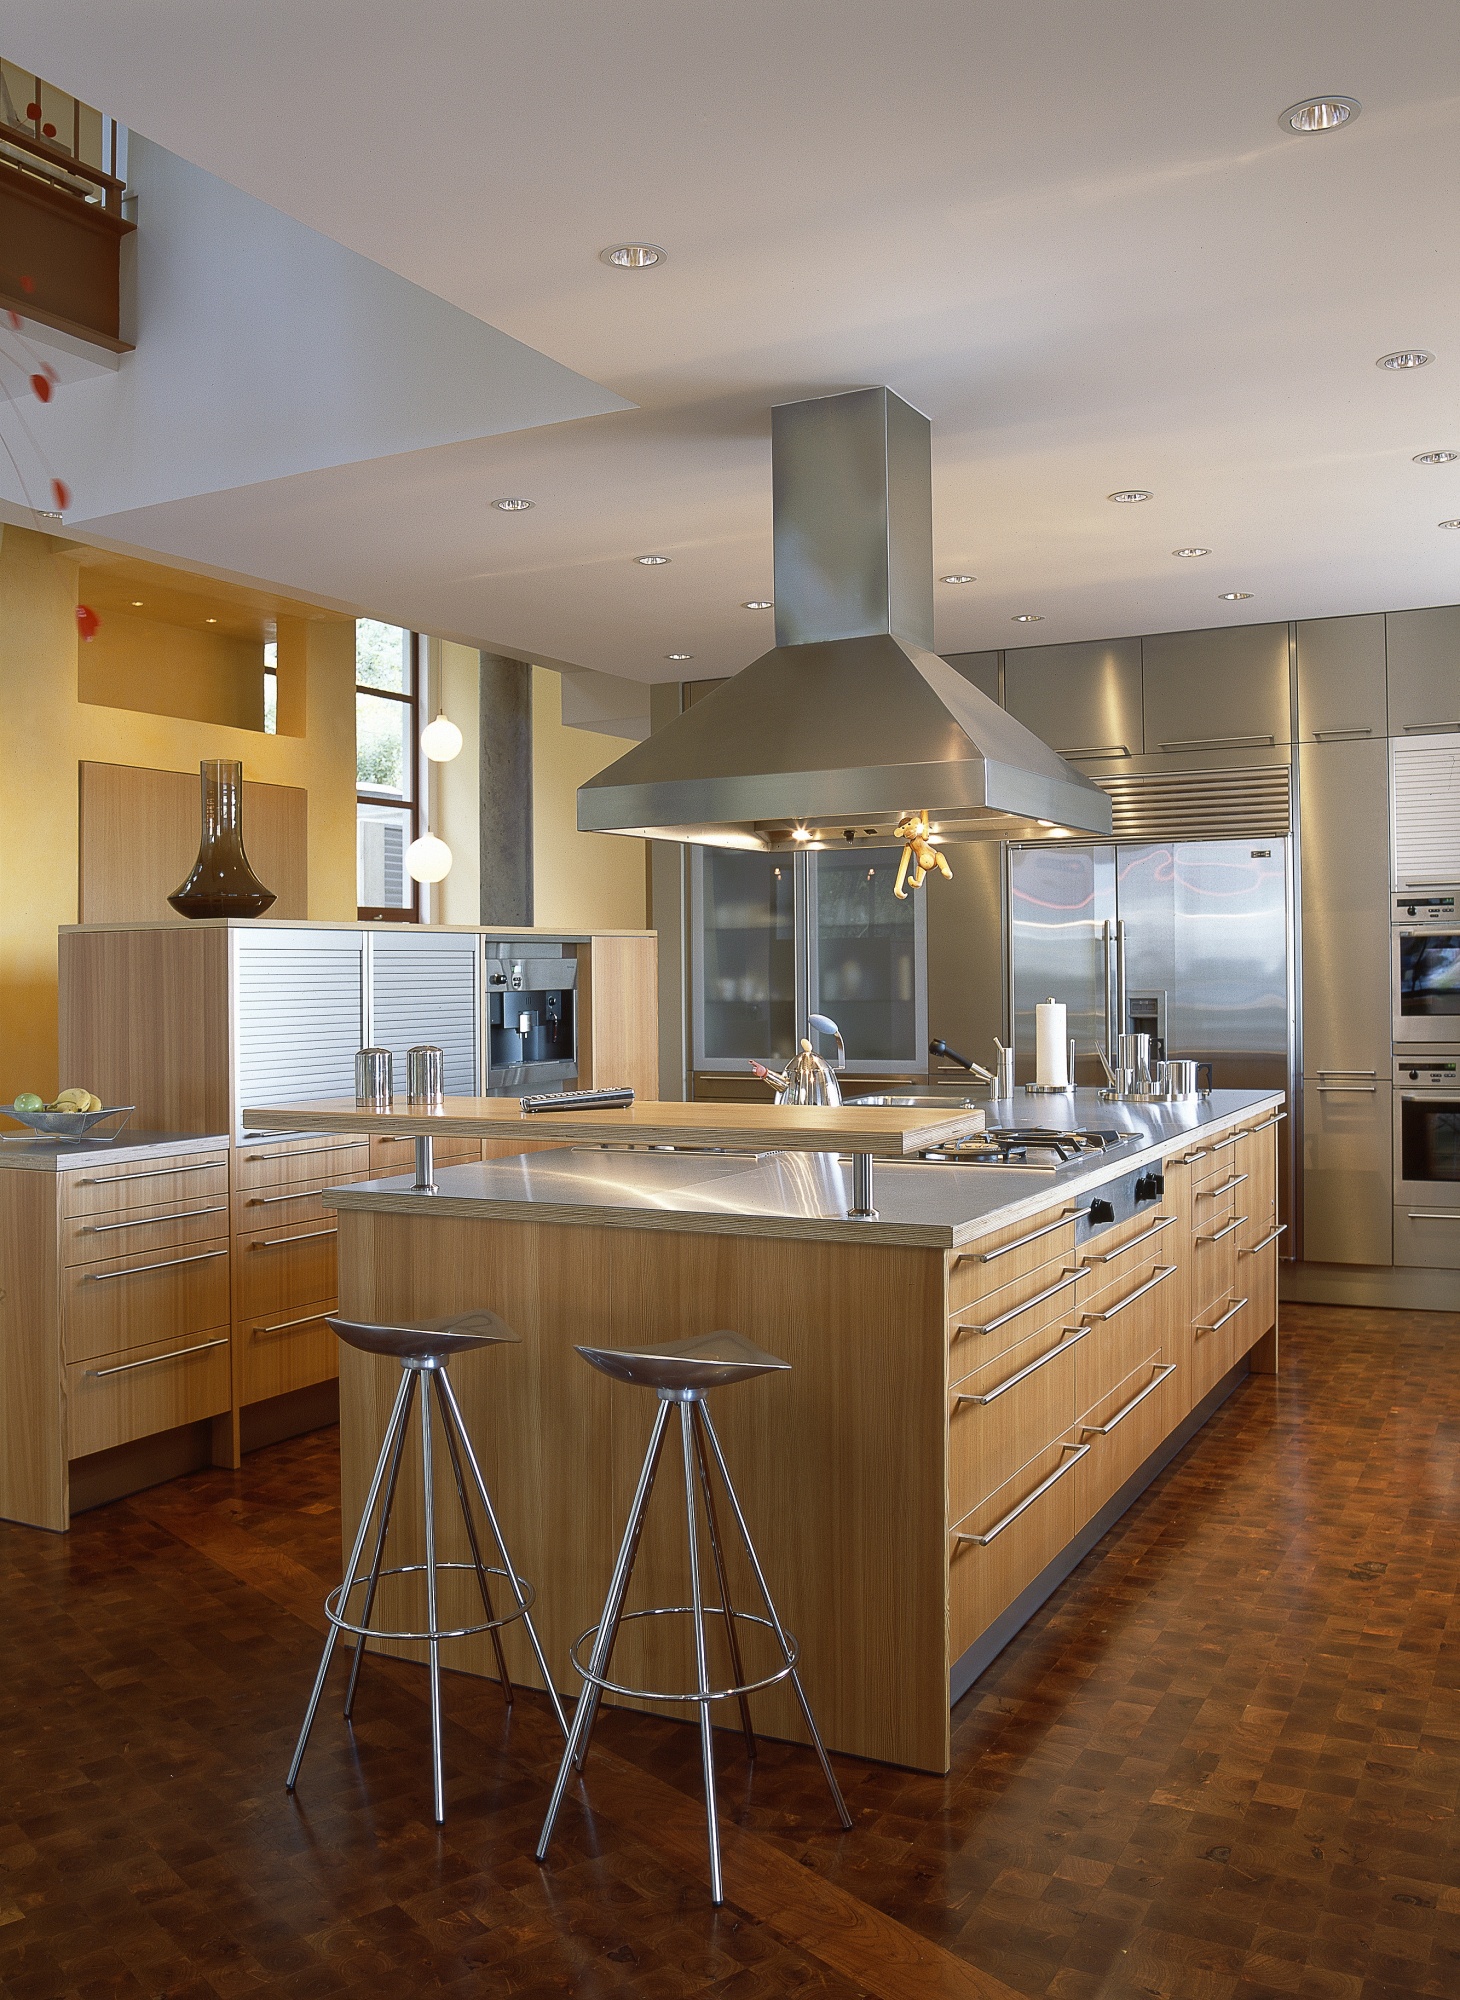 Bulthaup kitchen featuring stainless steel countertops.